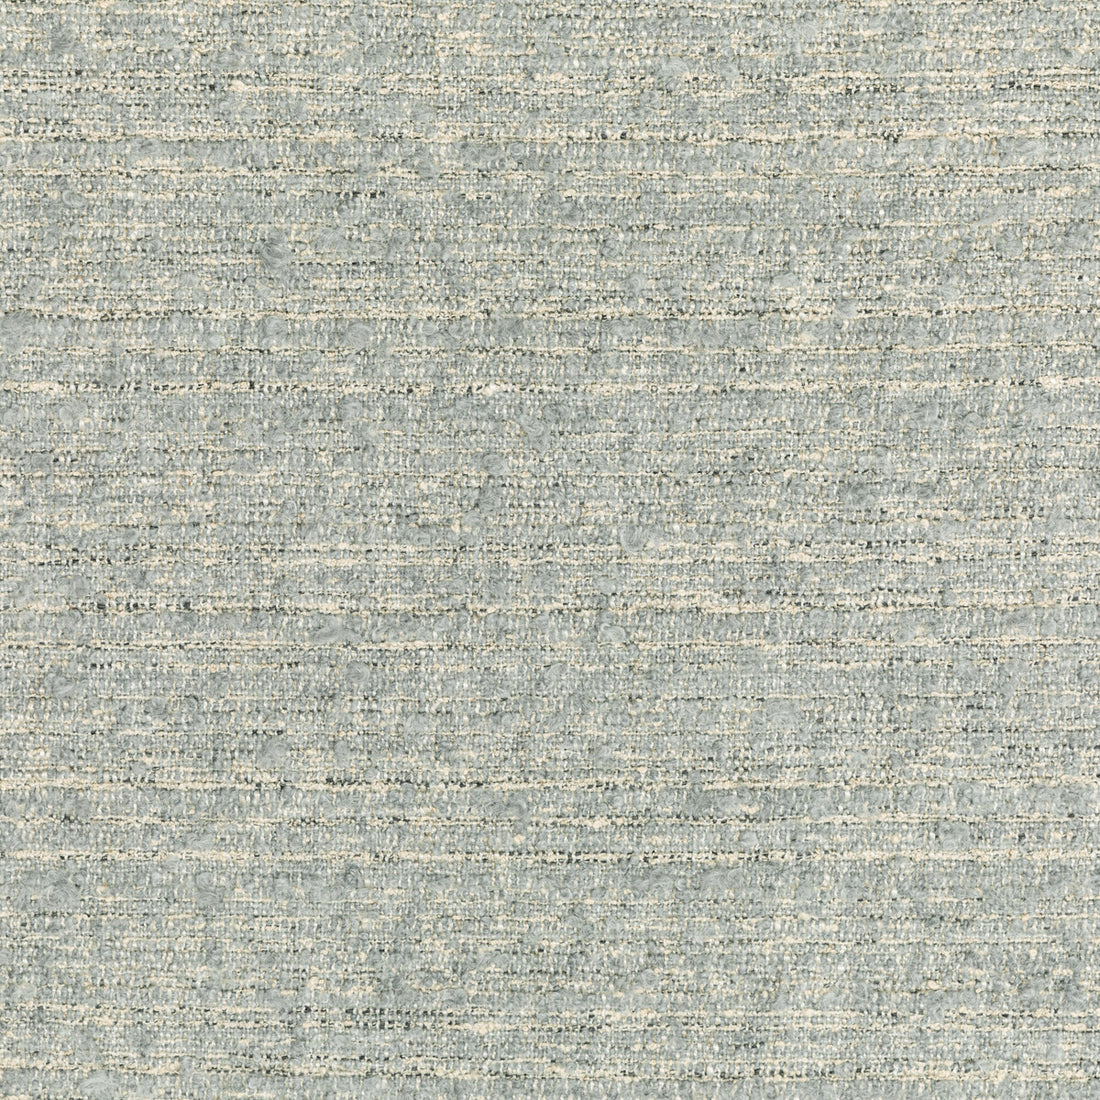 Lune fabric in haze color - pattern GWF-3767.113.0 - by Lee Jofa Modern in the Kelly Wearstler VI collection